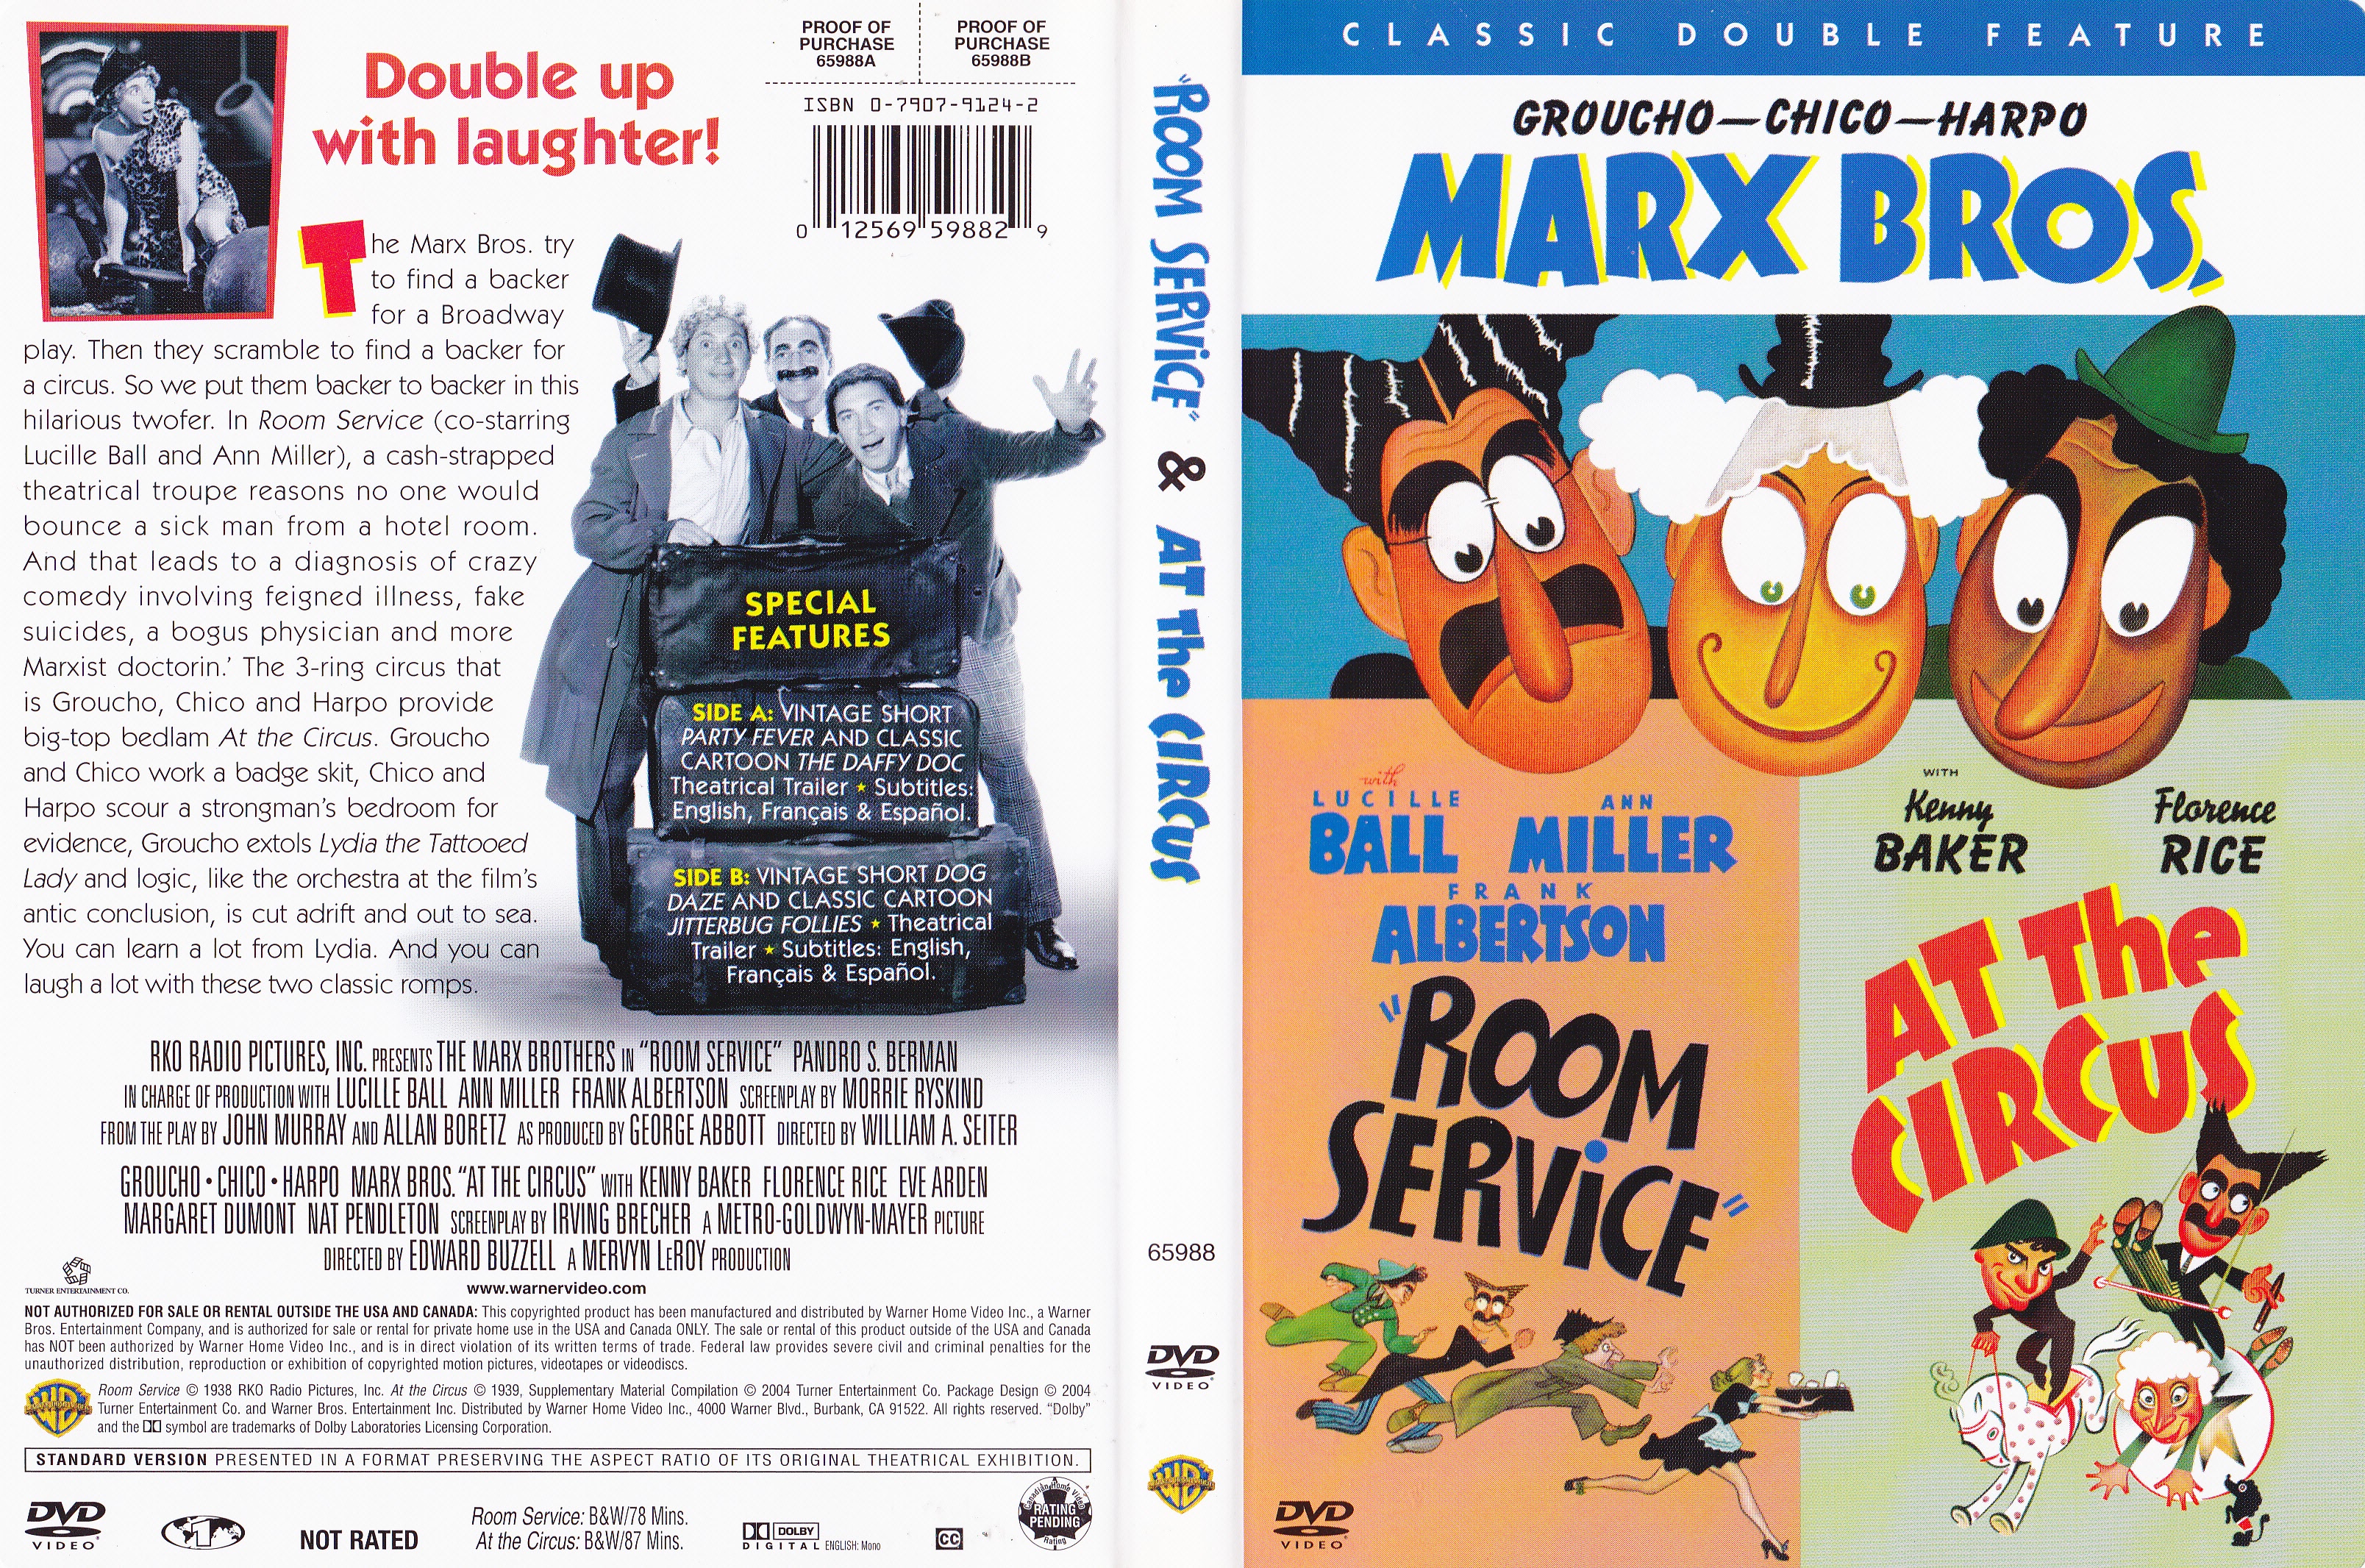 Jaquette DVD The marx Brothers - Room service + At the circus (Canadienne)